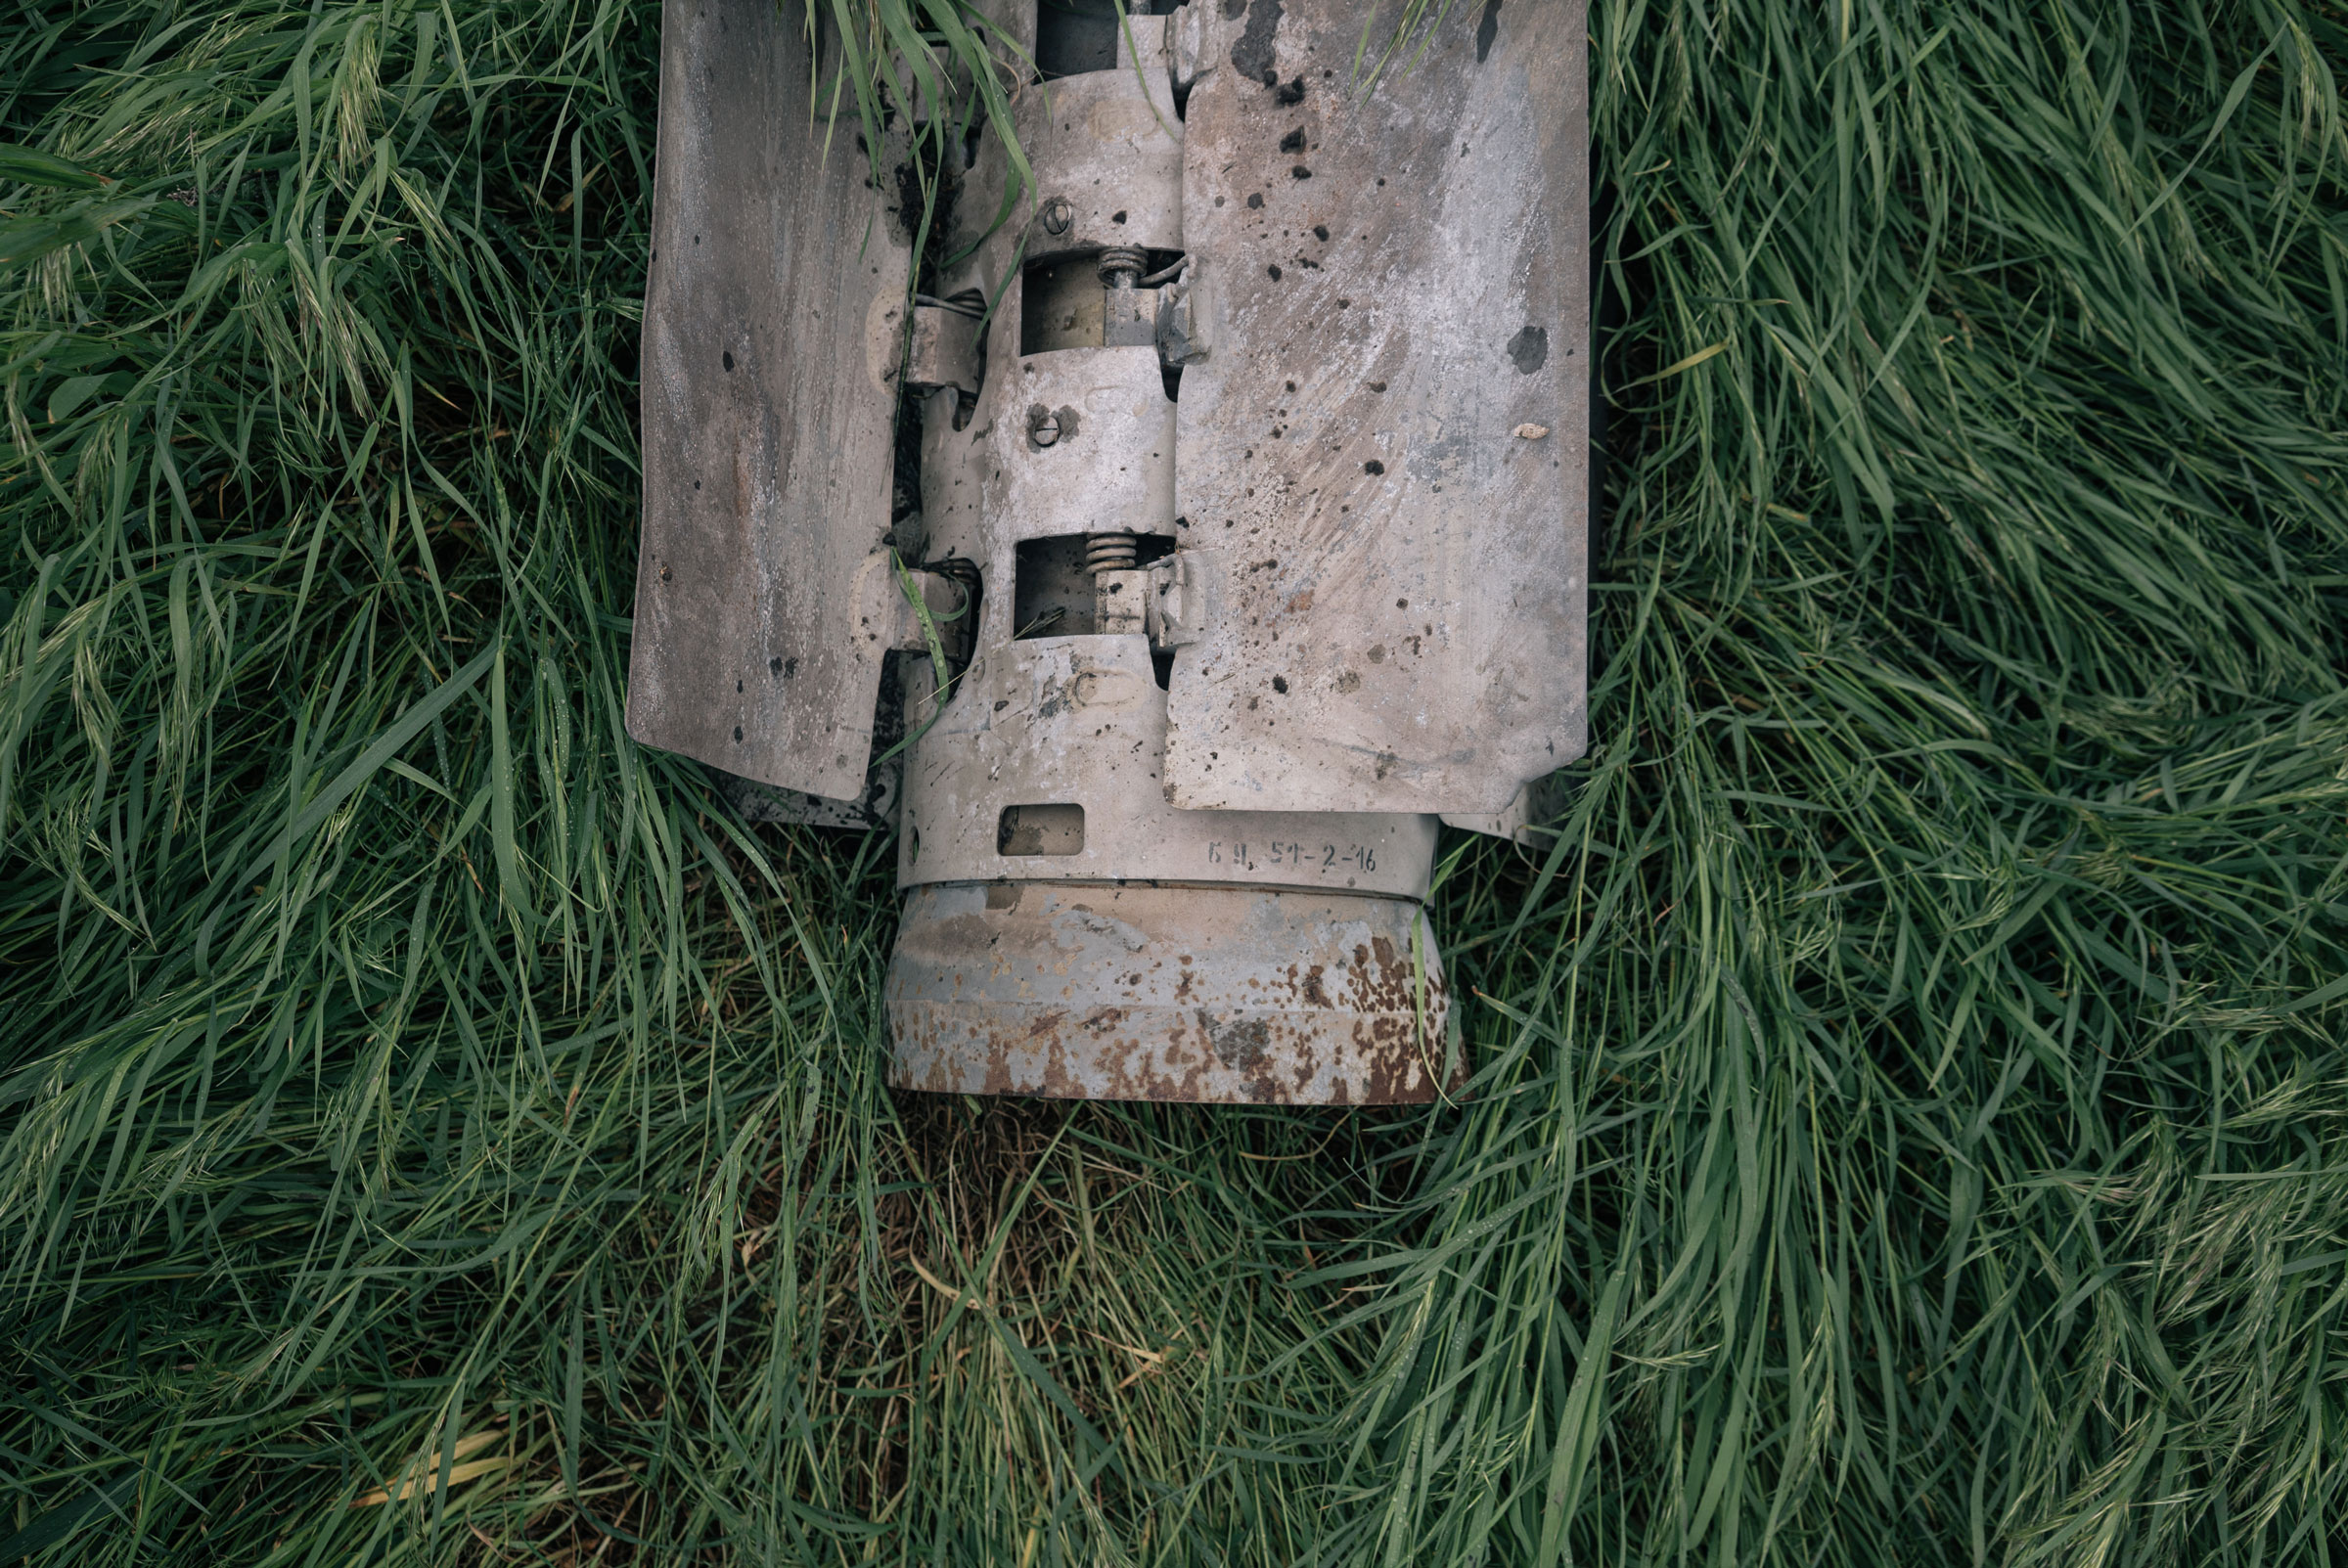 The remains of a rocket that carried cluster munitions found in a field in the countryside of Kherson region, Ukraine, on April 28. (Alice Martins—The Washington Post/Getty Images)